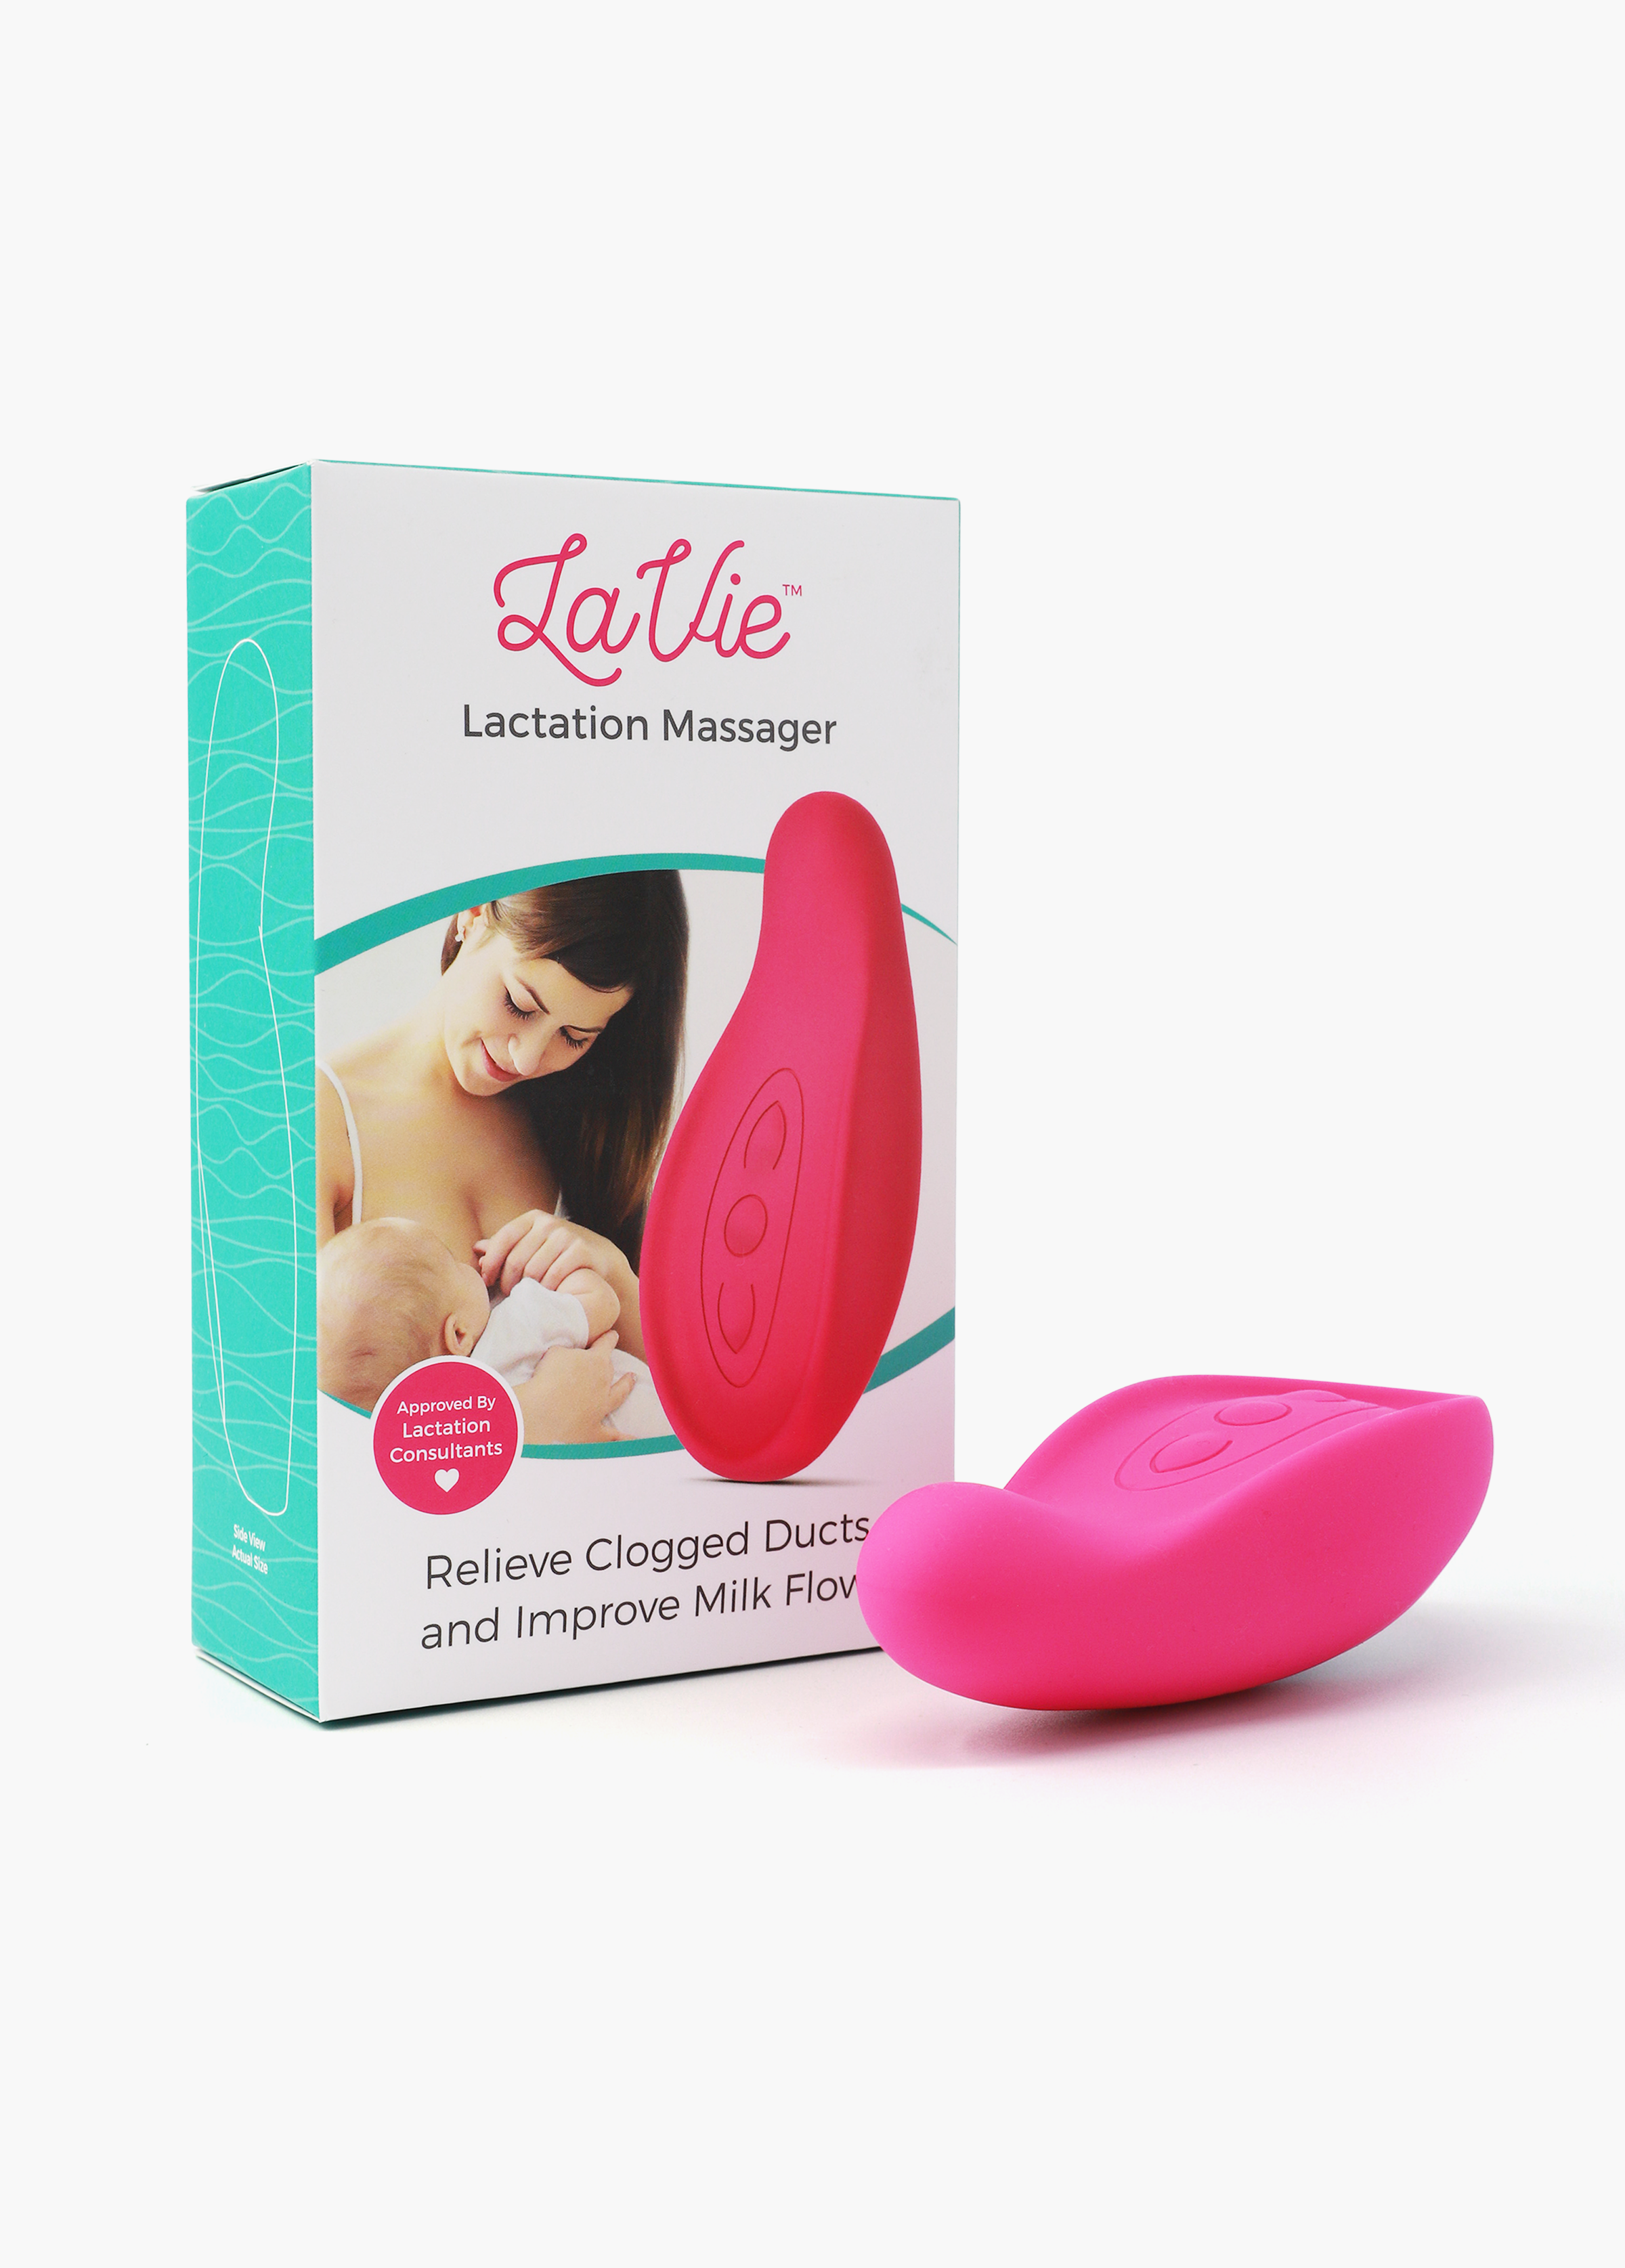 LaVie Lactation Massager  PreventClogged ducts and Improve Milk